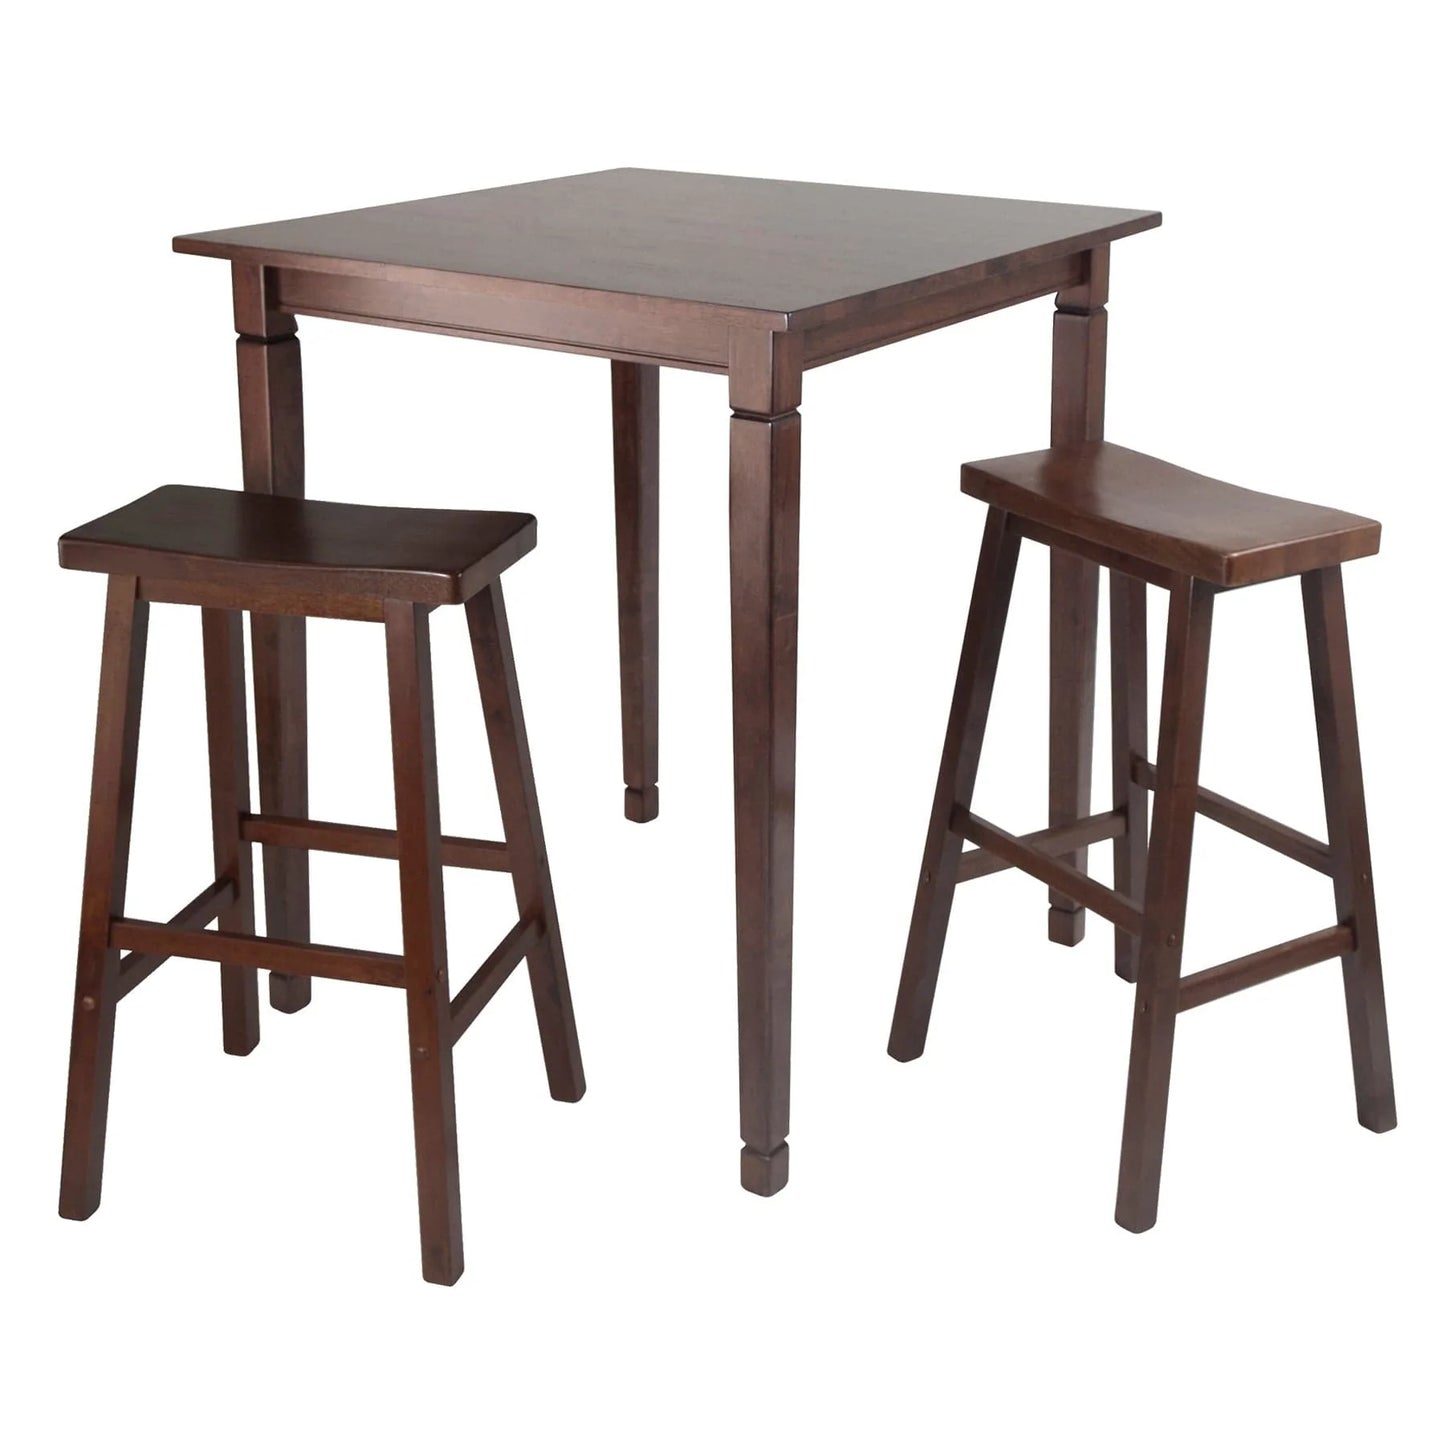 WINSOME Pub Table Set Kingsgate 3-Pc High Dining Table with Saddle Seat Bar Stools, Walnut